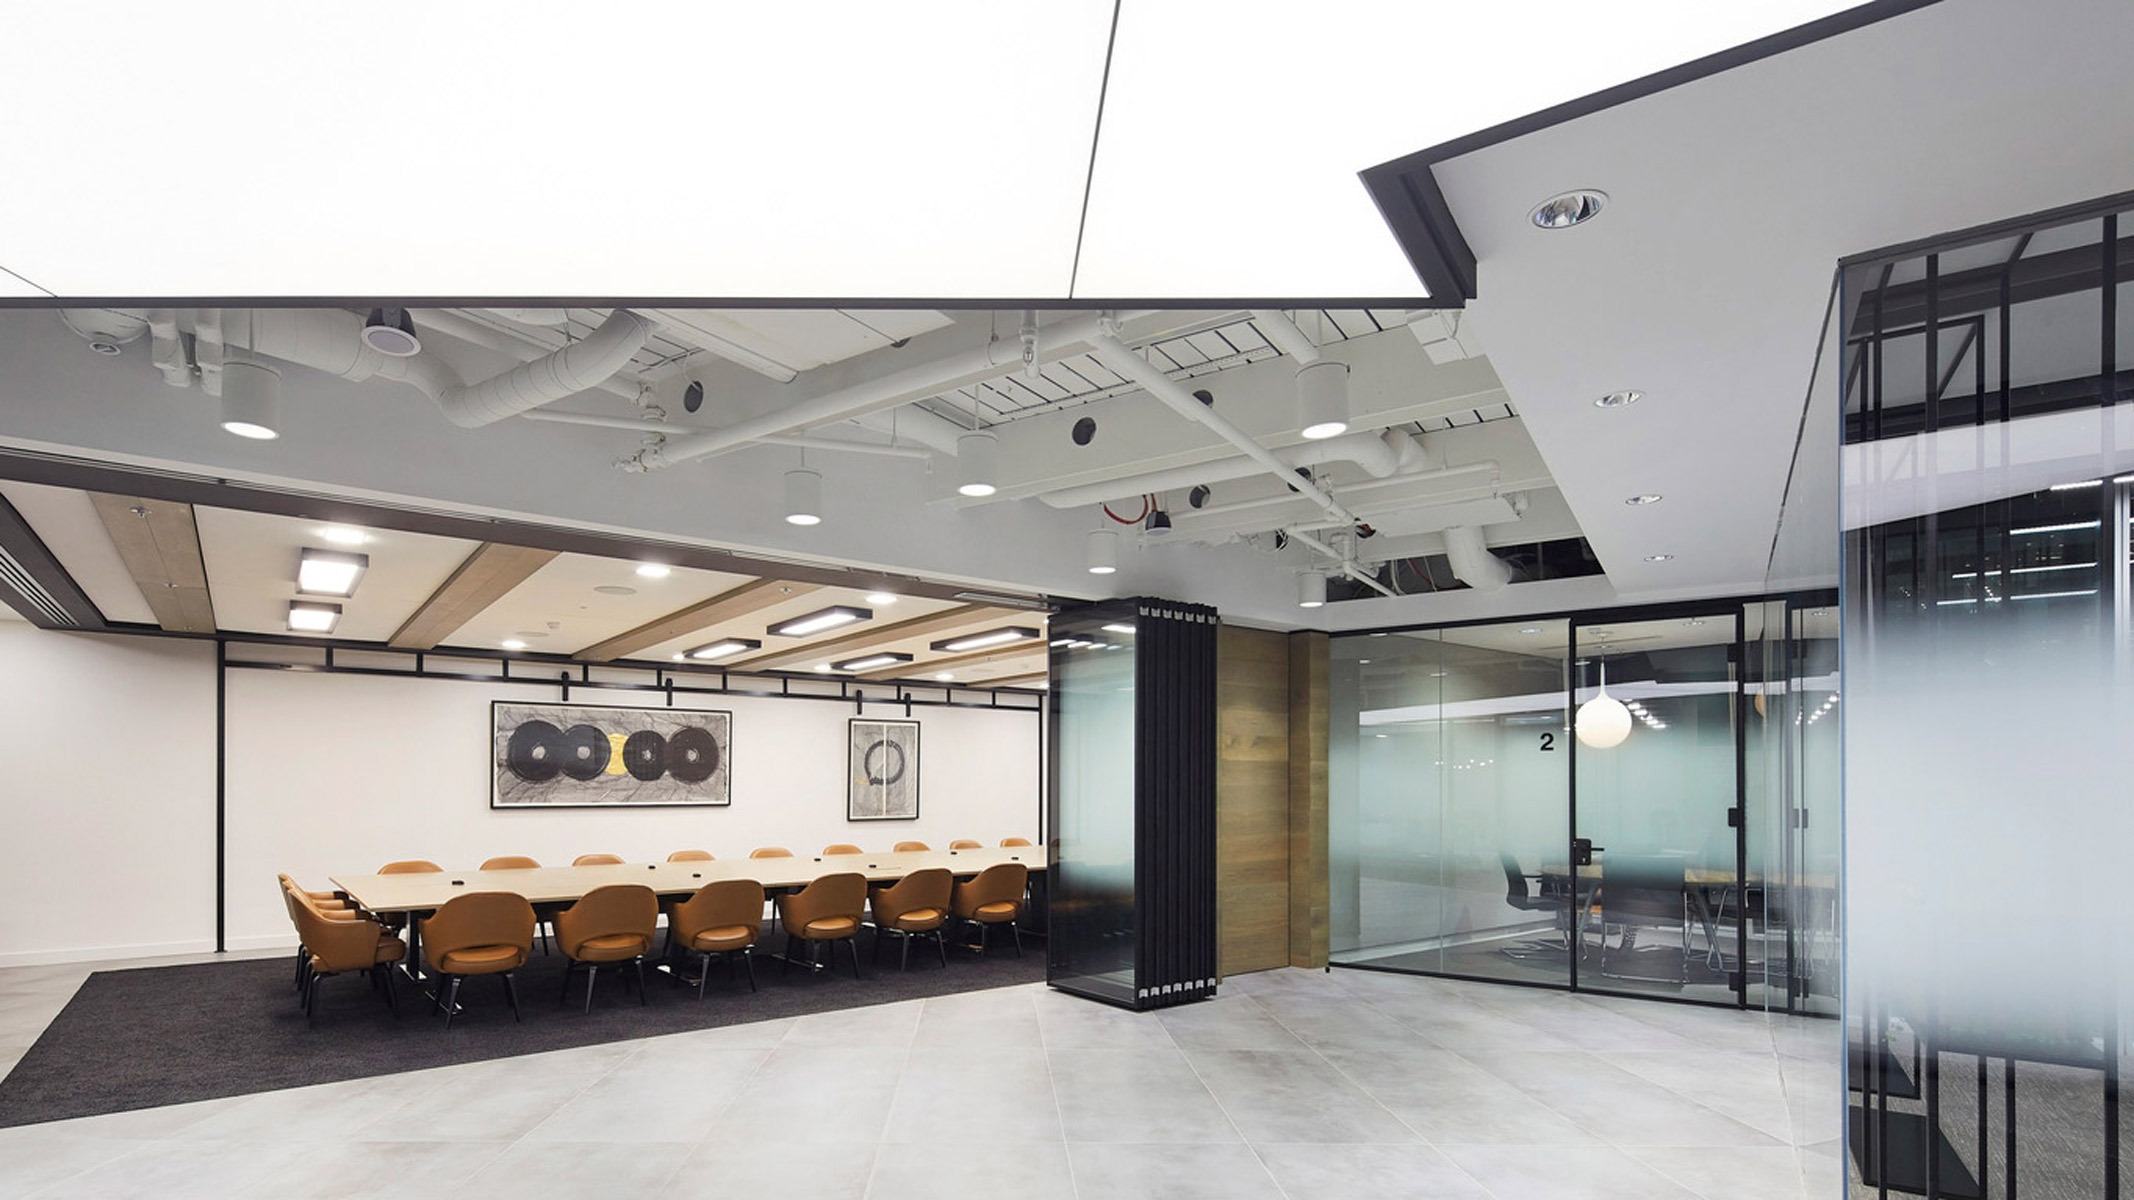 Modern conference room boasting a sleek, monochrome color palette with contrastive brown chairs and strategic lighting; features exposed ductwork, a reflective whiteboard, and glass partitions fostering a sense of openness while maintaining distinct functional areas.